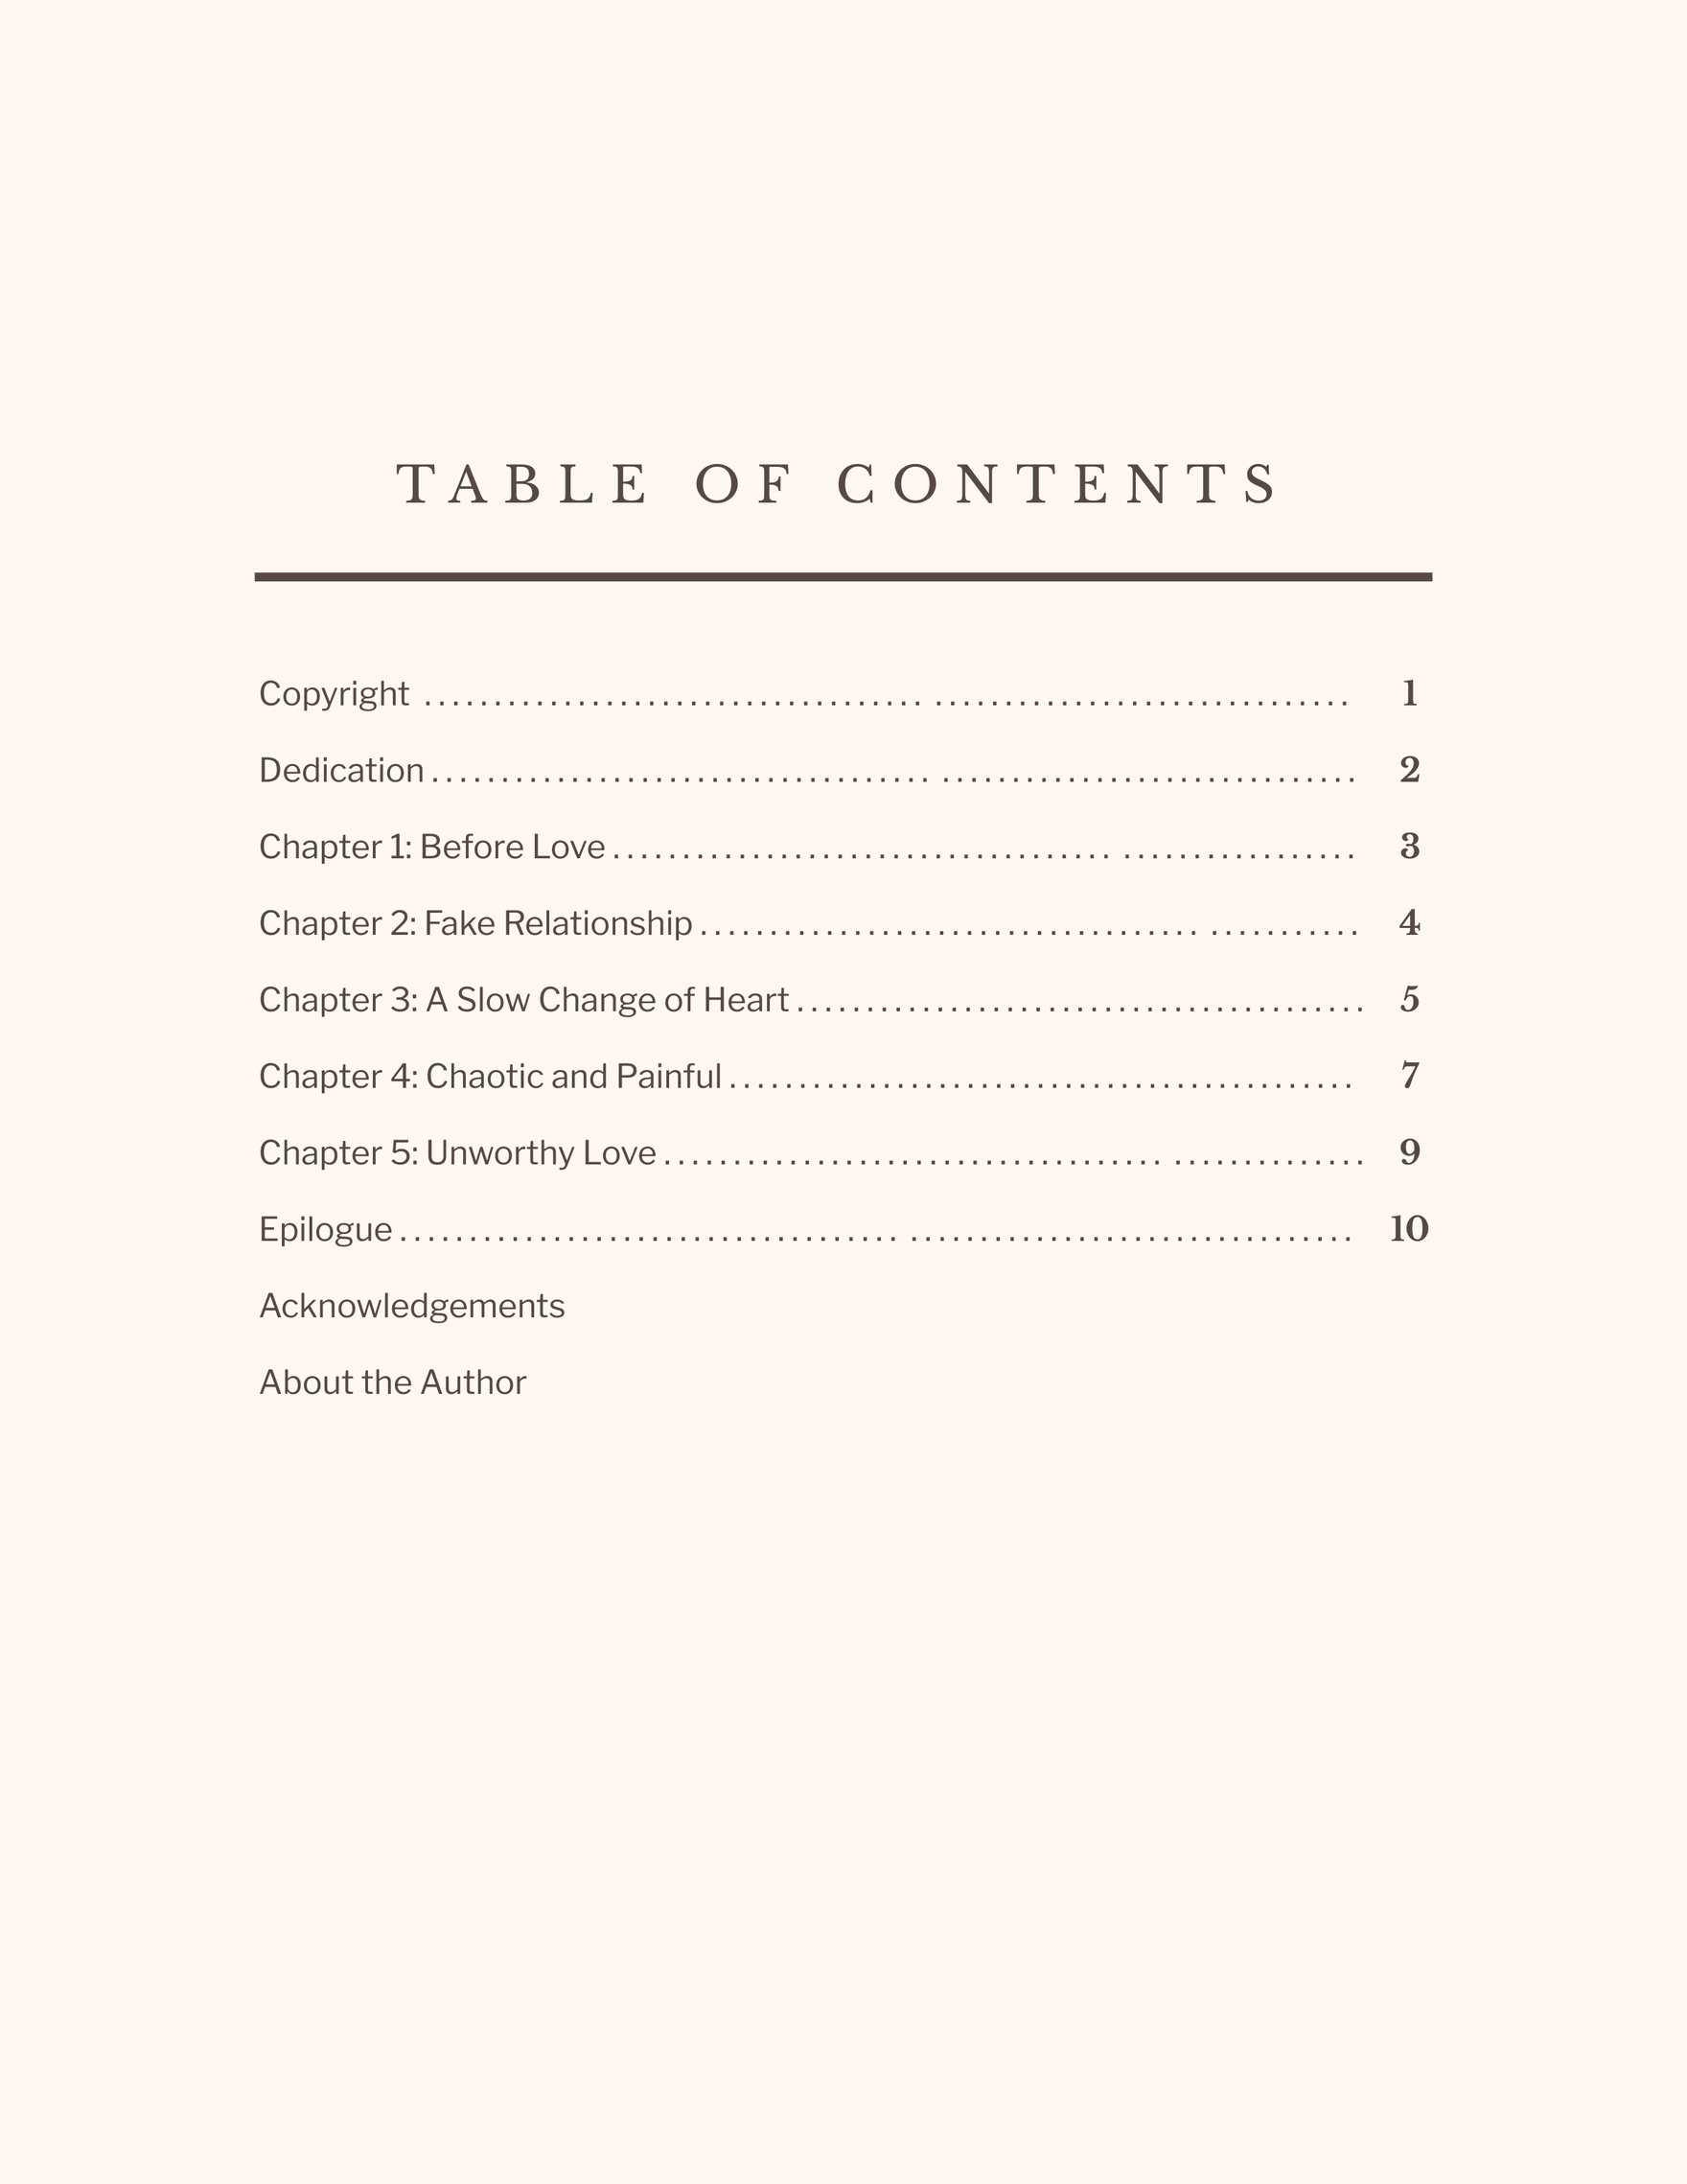 Novel Table of Contents Template